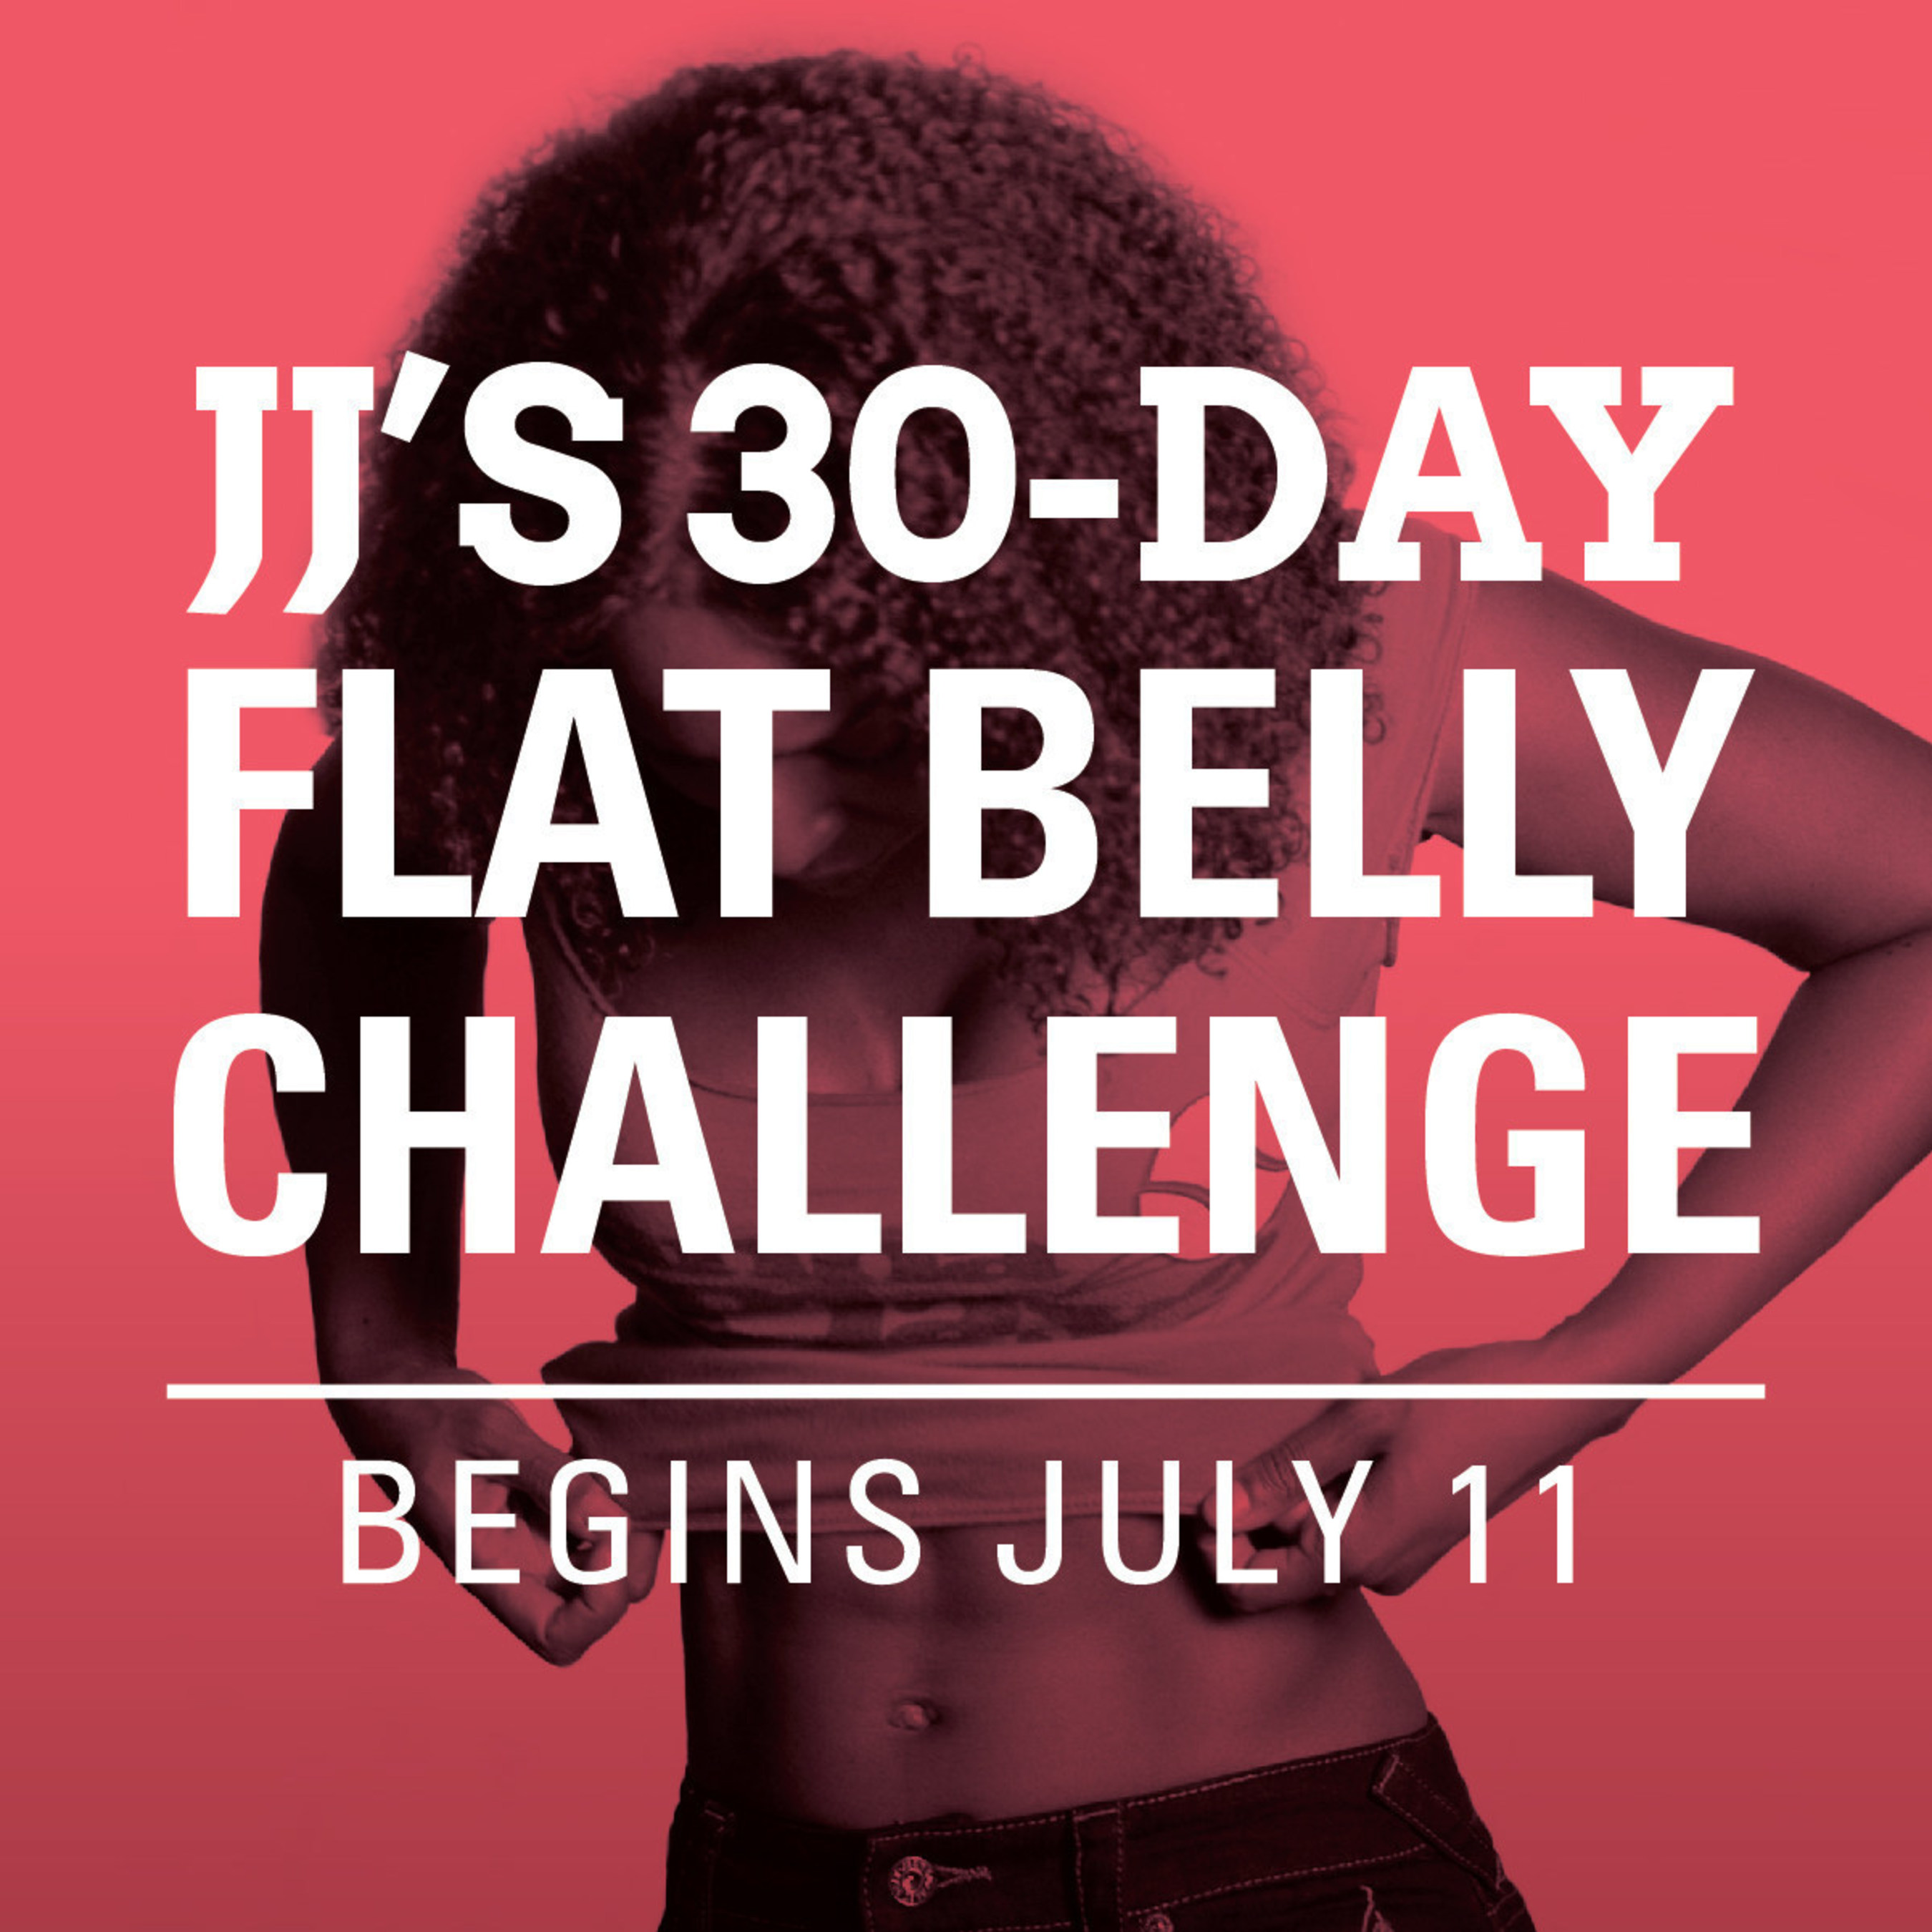 Jj Smith Leads Nationwide 30 Day Flat Belly Challenge On Monday